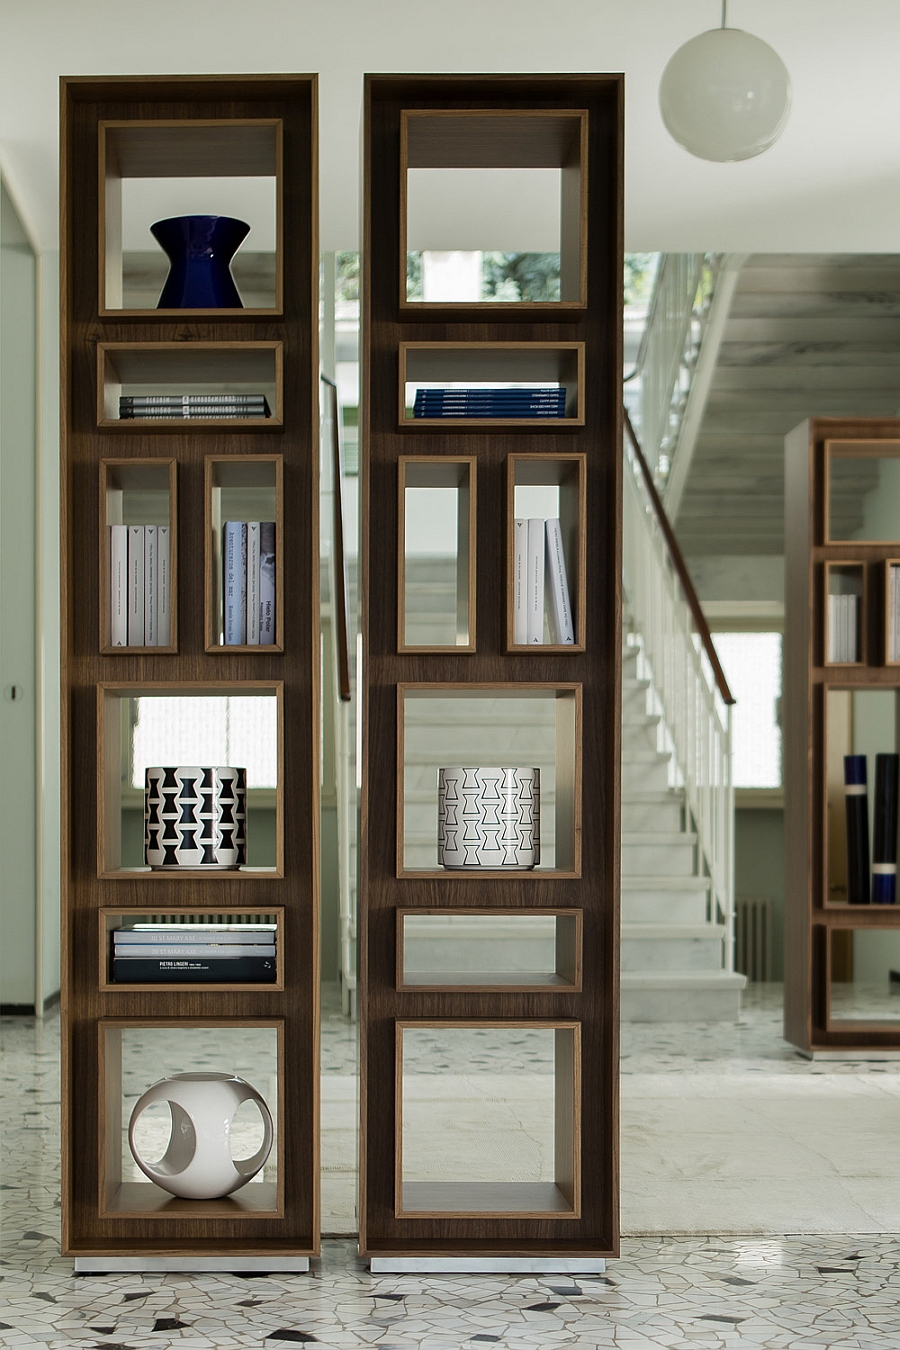 Elegant bookshelves can be used to create a more eloborate composition